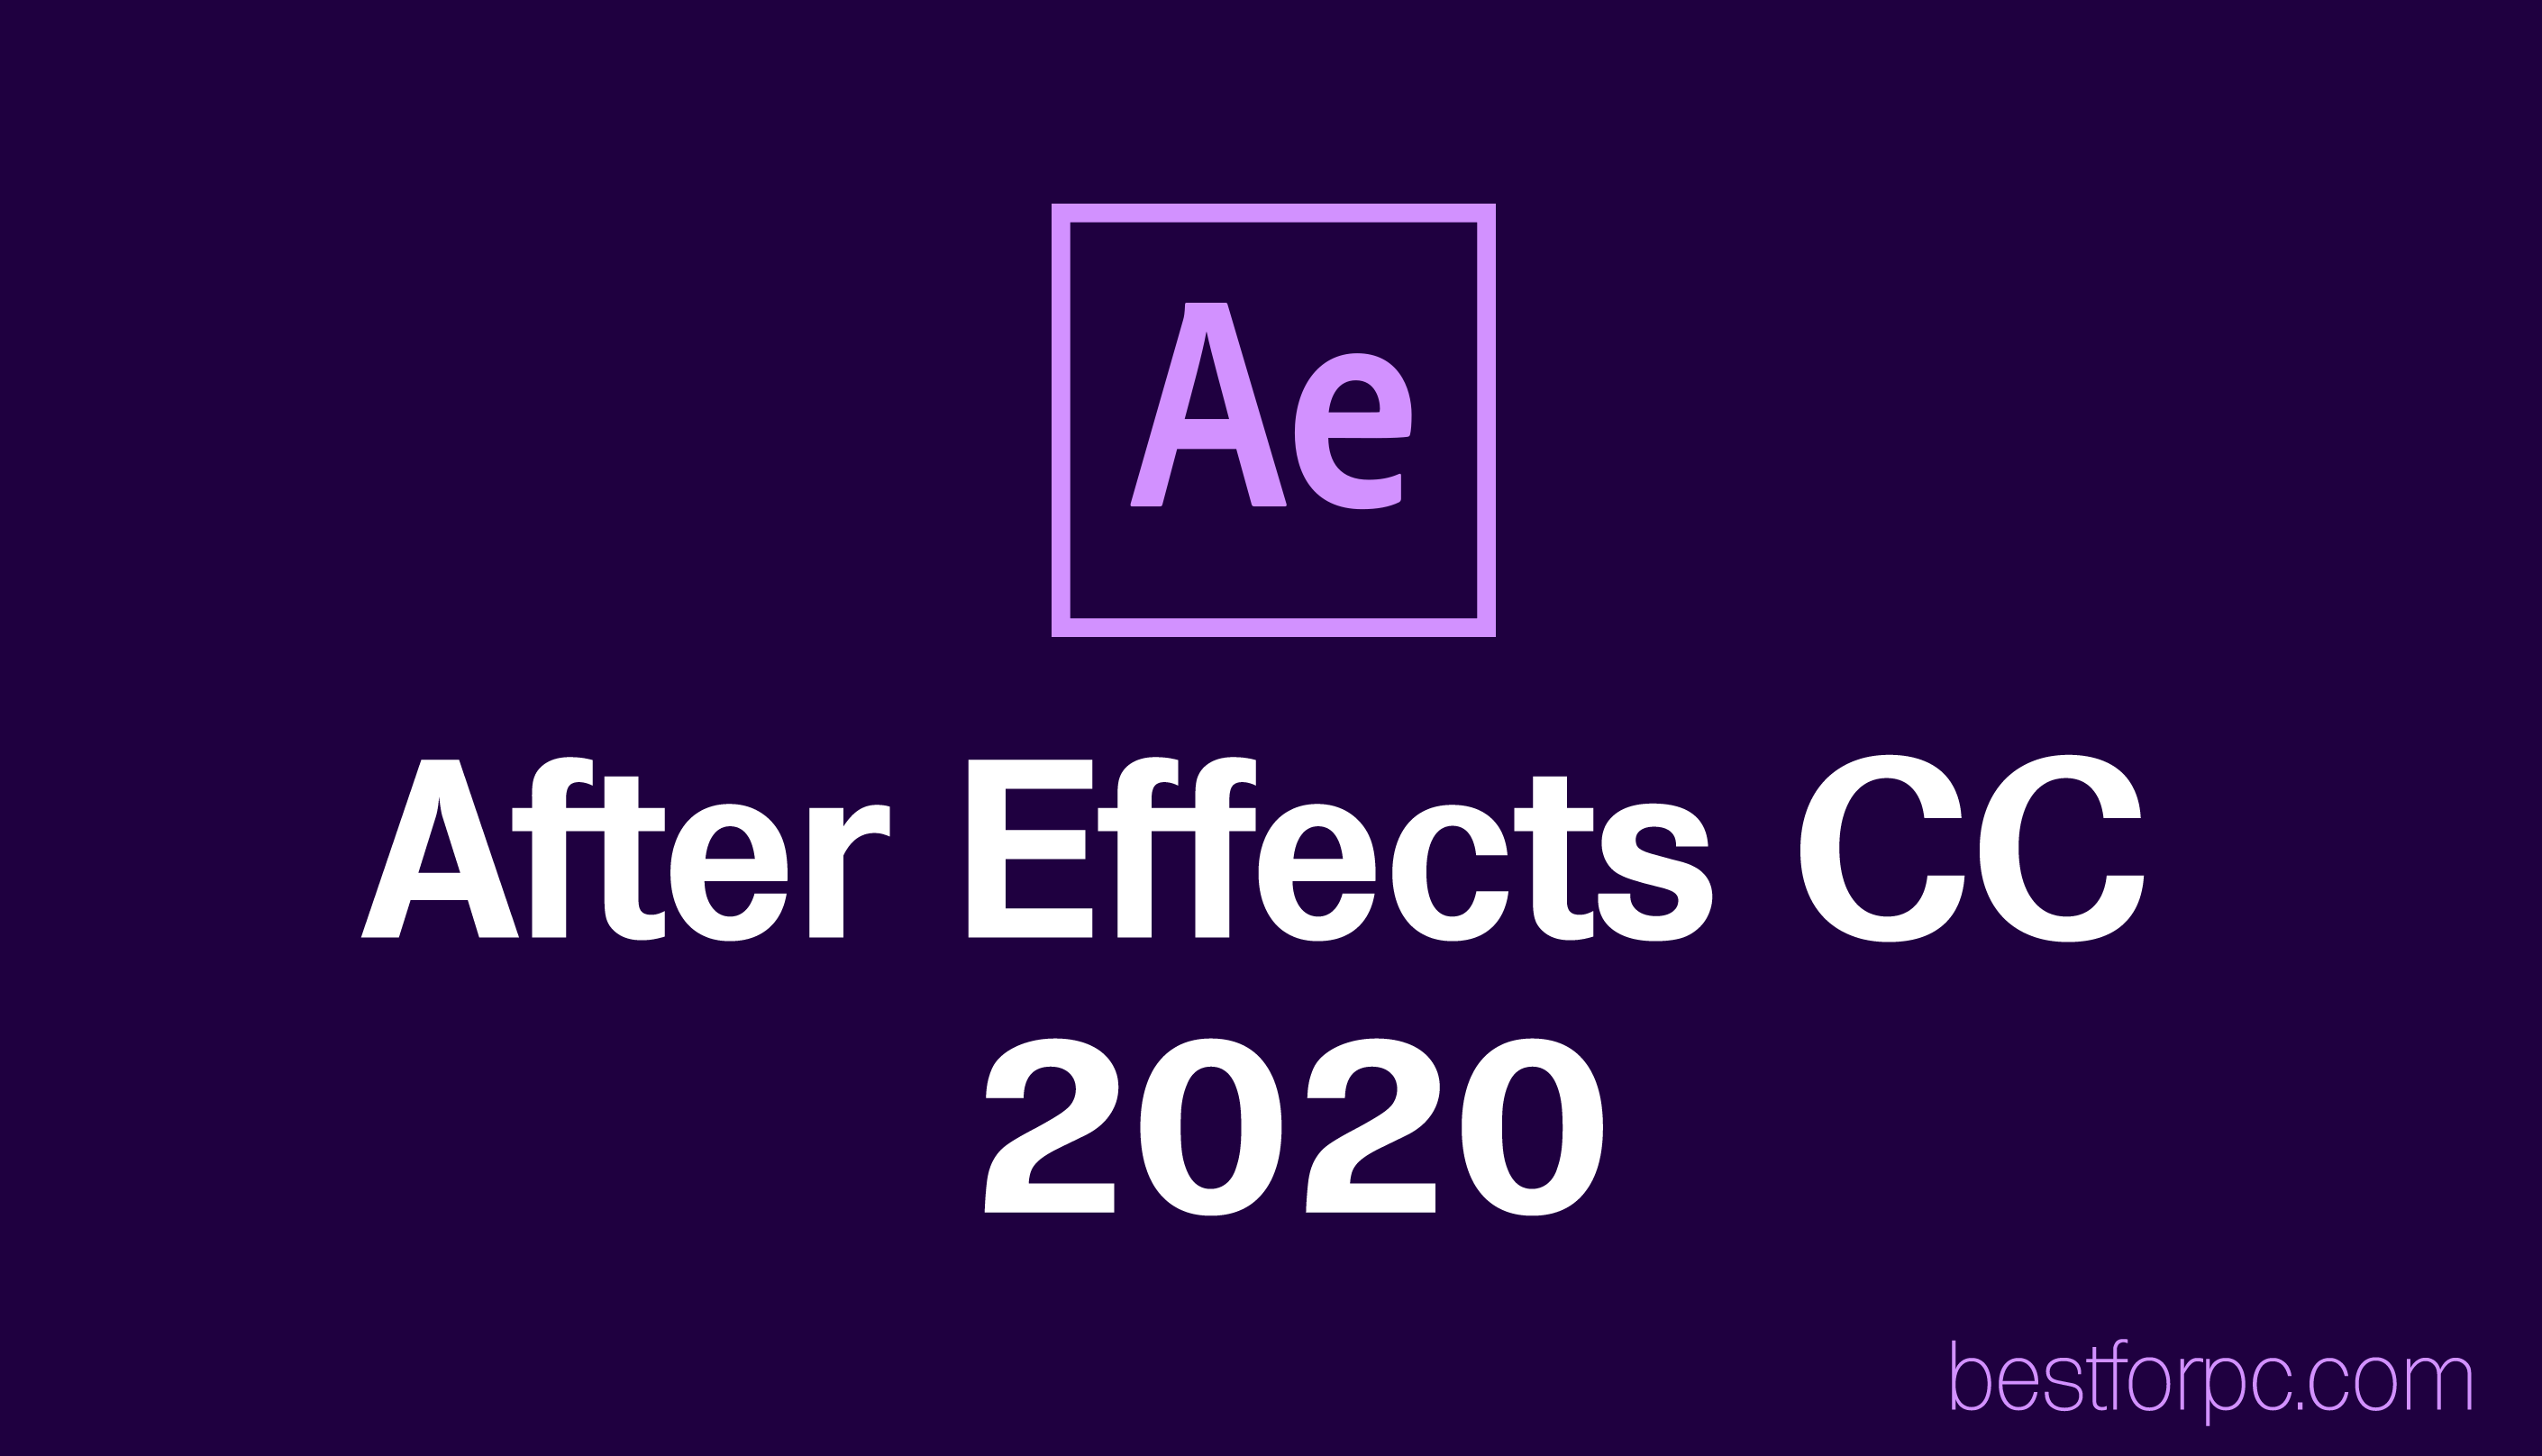 how to download after effects 2020